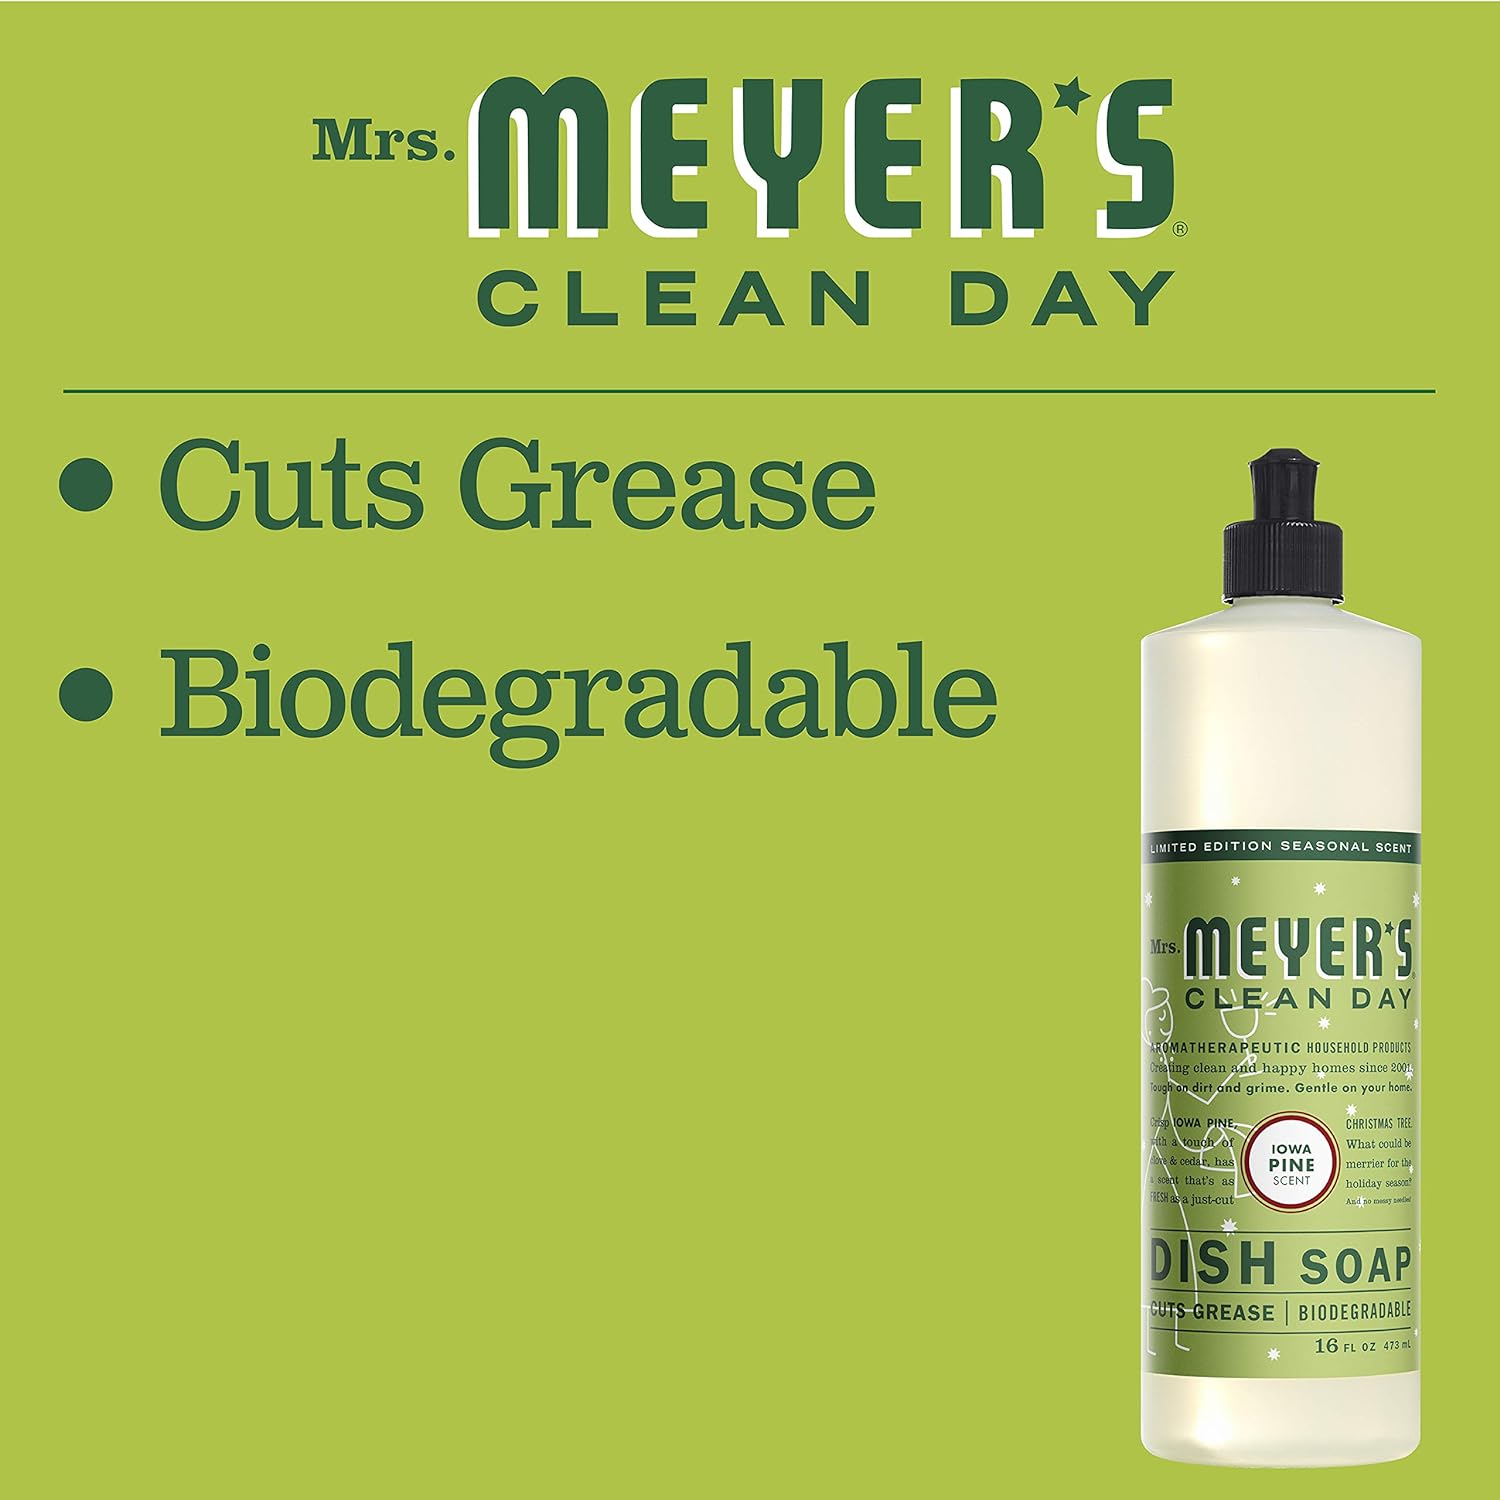 MRS. MEYER'S CLEAN DAY Liquid Dish Soap, Biodegradable Formula, Limited Edition Iowa Pine, 16 fl. oz - Pack of 3 : Health & Household